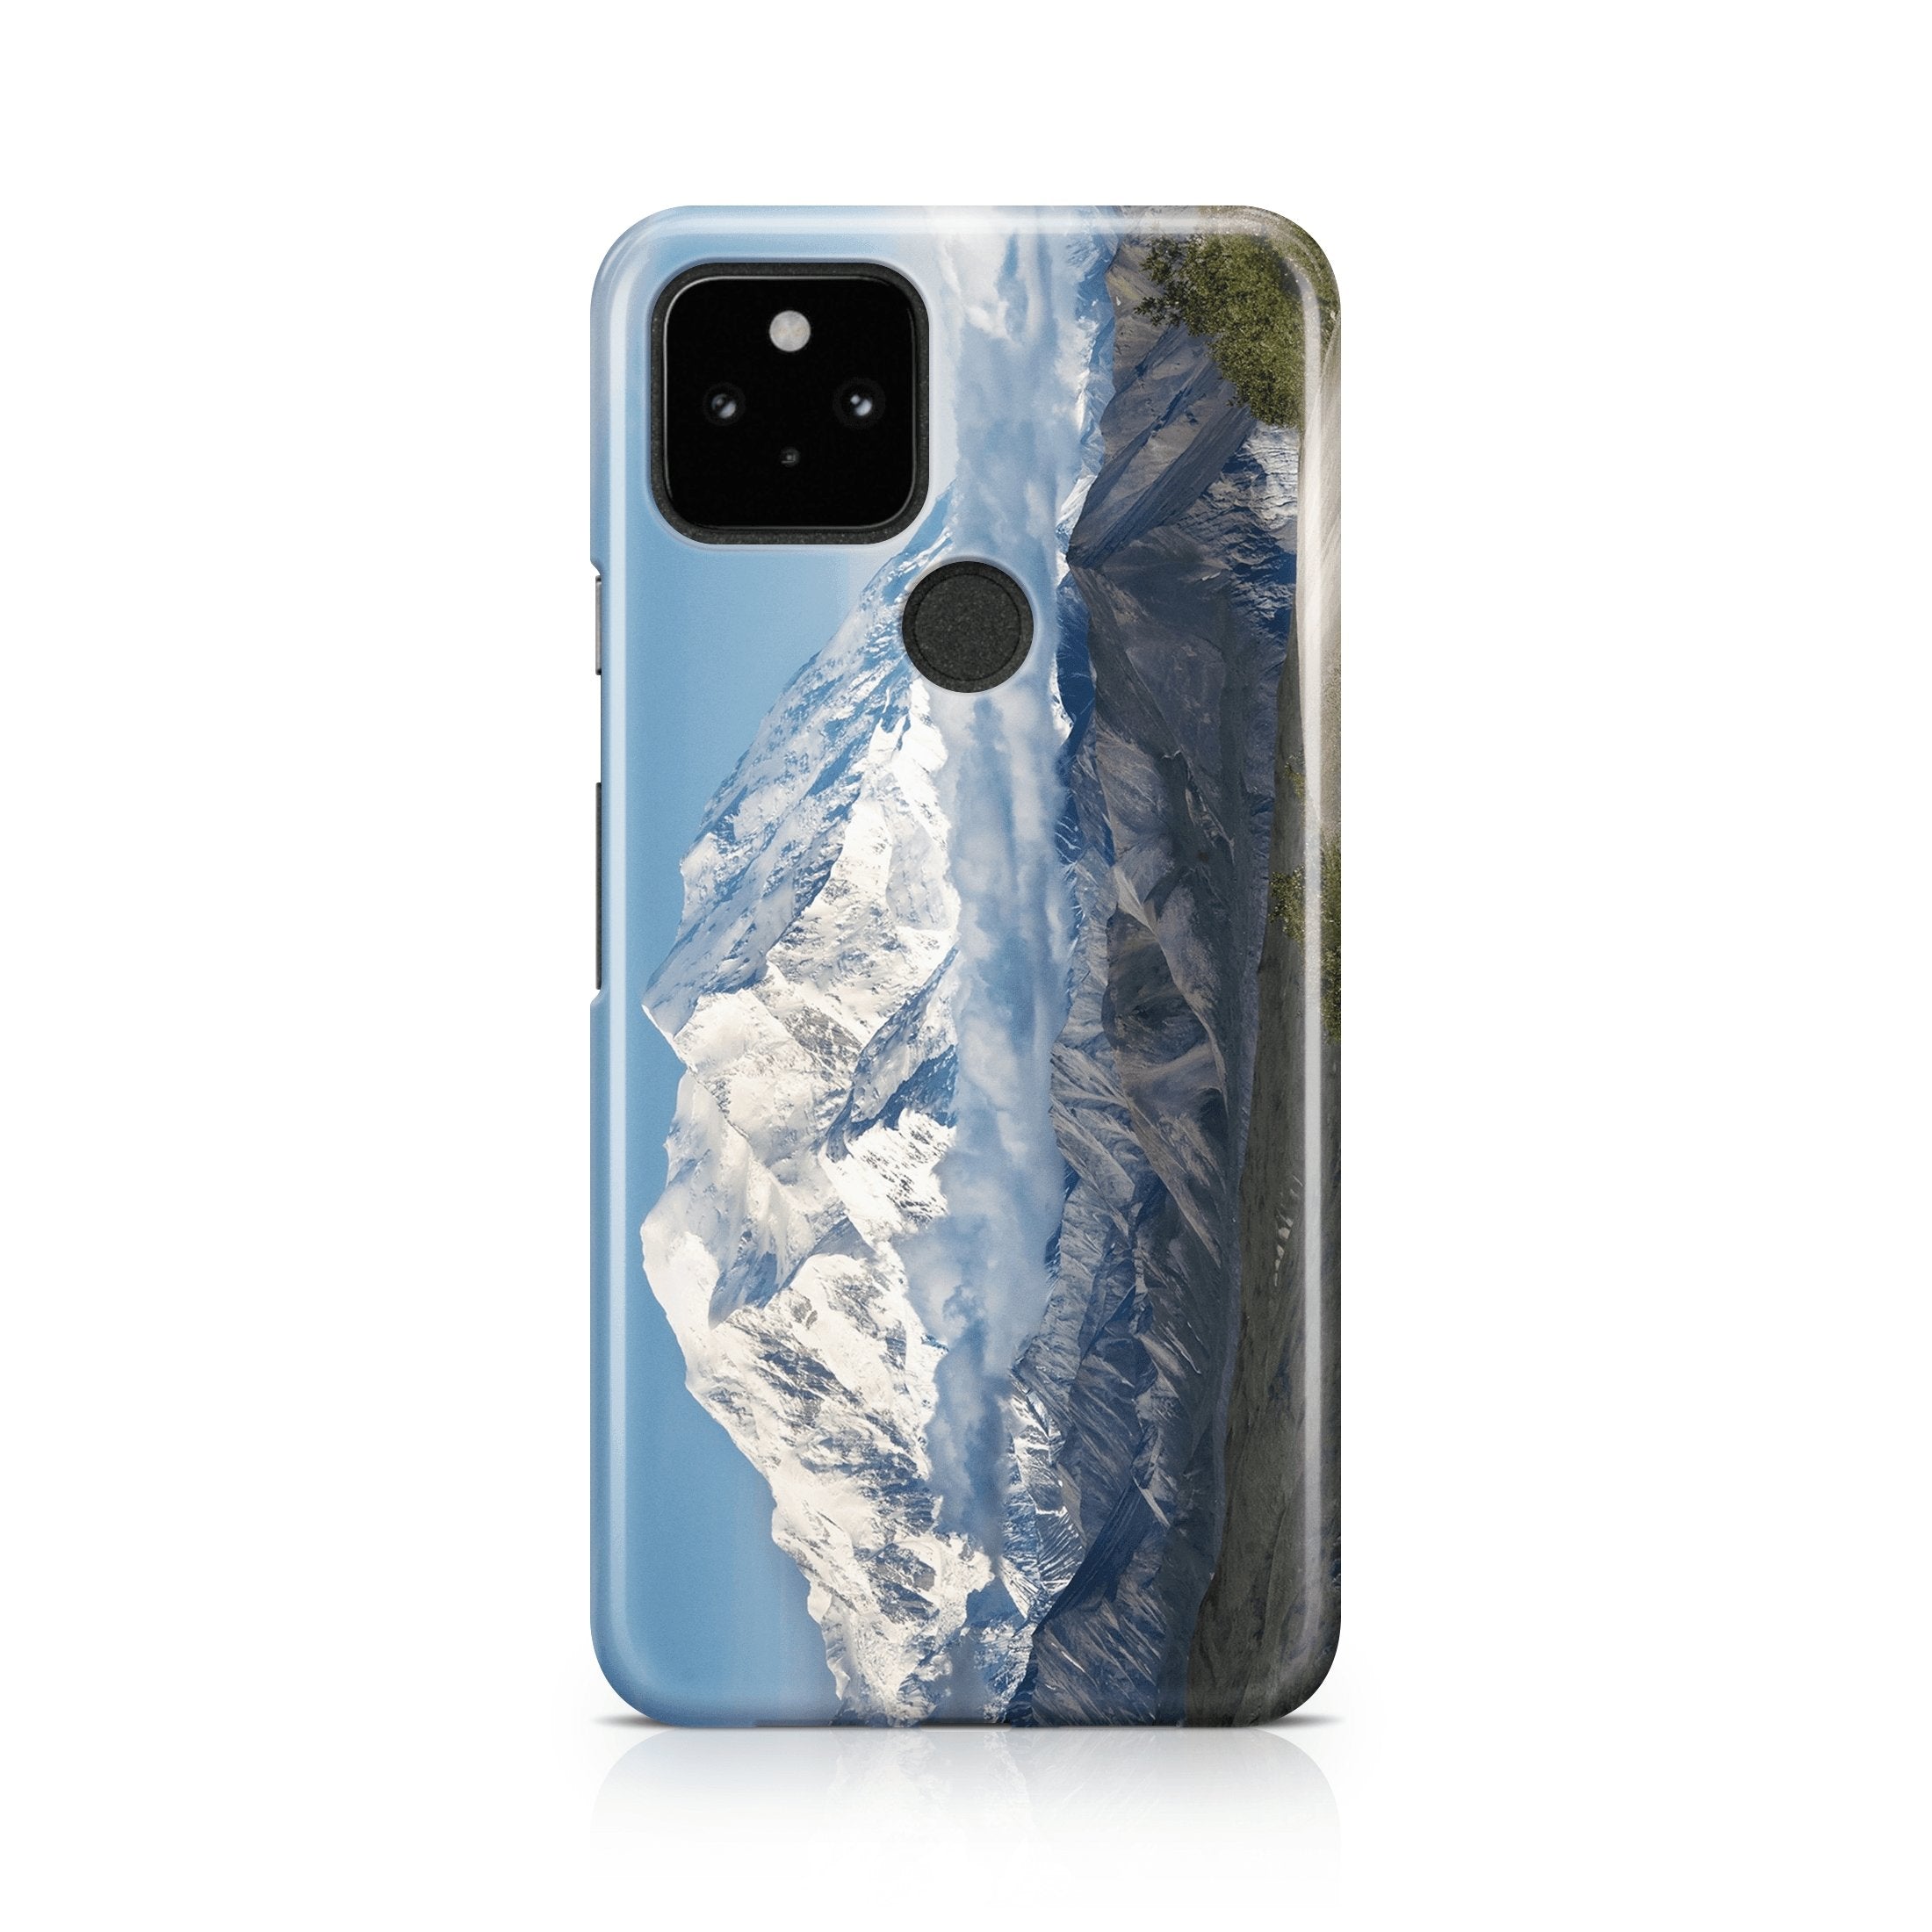 Mountain Range - Google phone case designs by CaseSwagger